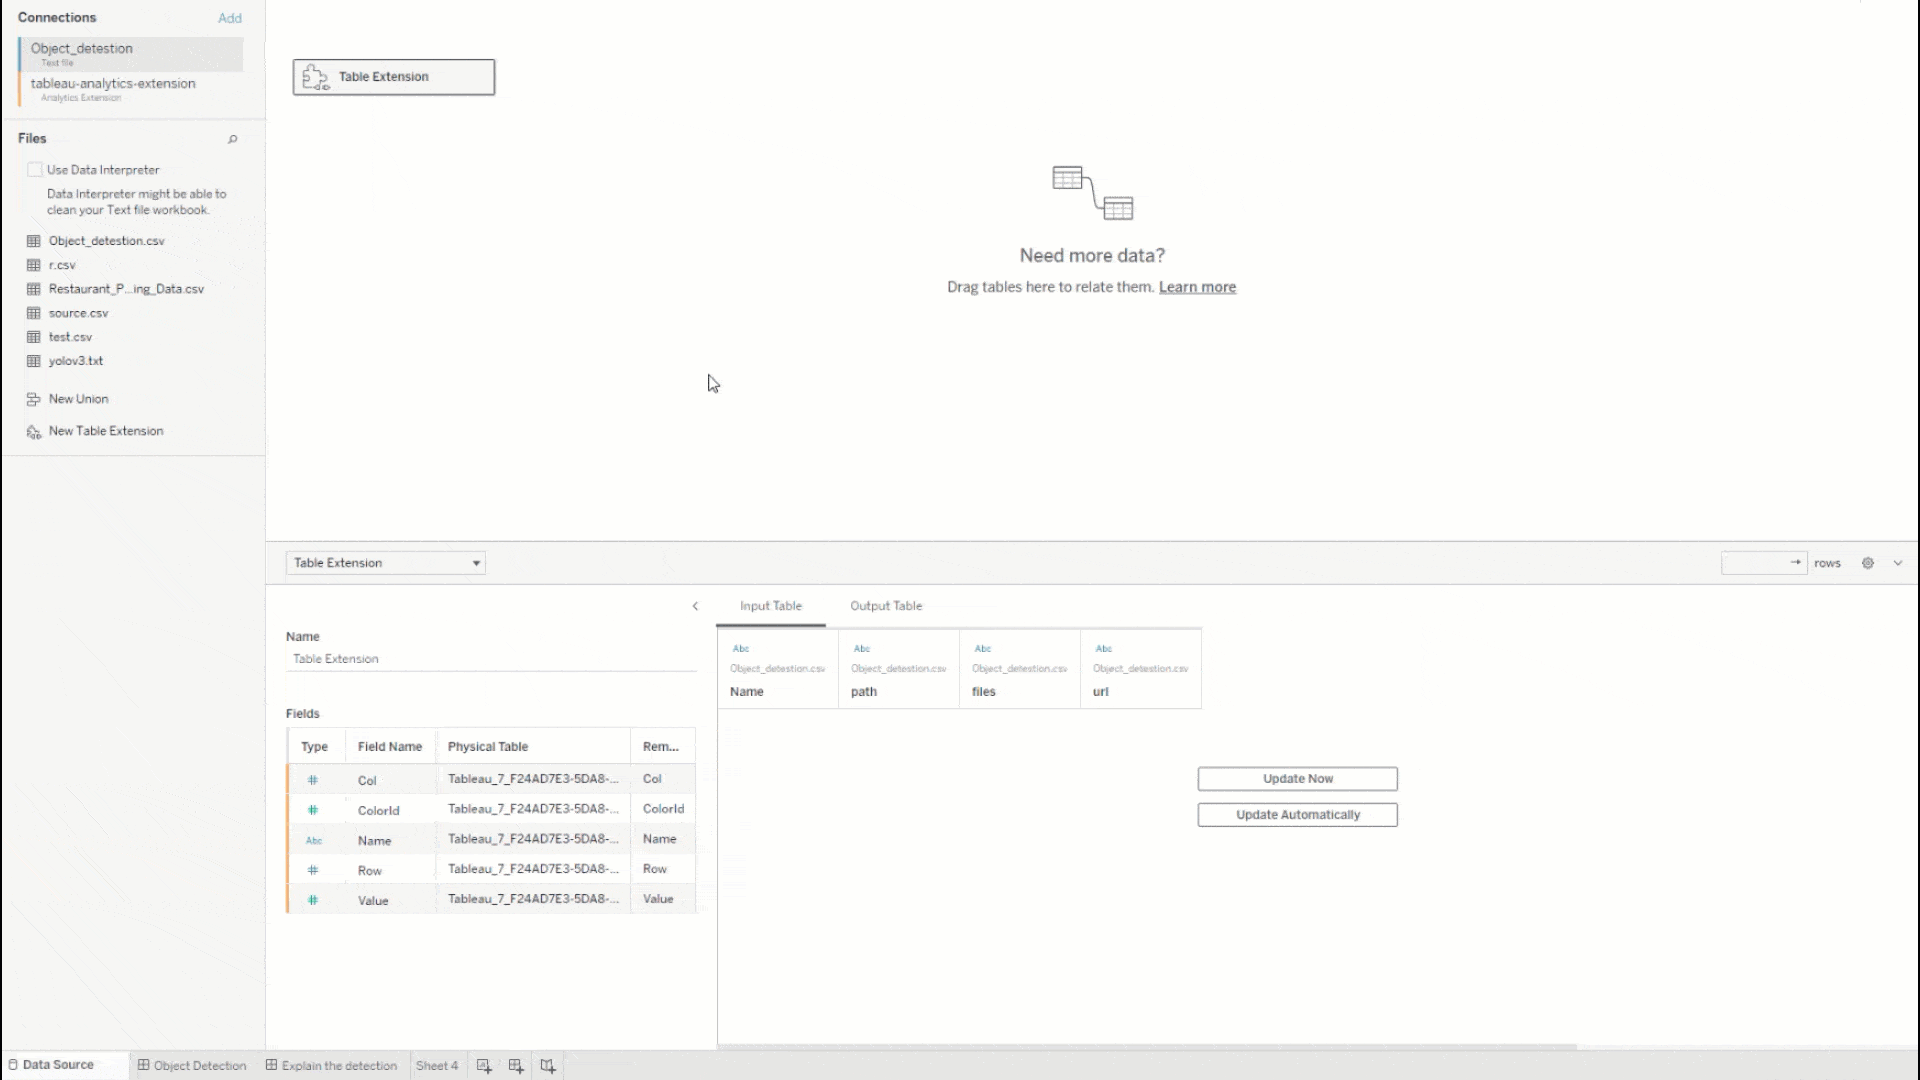 Animated GIF of the Tableau web authoring interface showing the user connecting a Table Extension through TabPy, producing an output table, and filtering through visualizations using data from the output table.